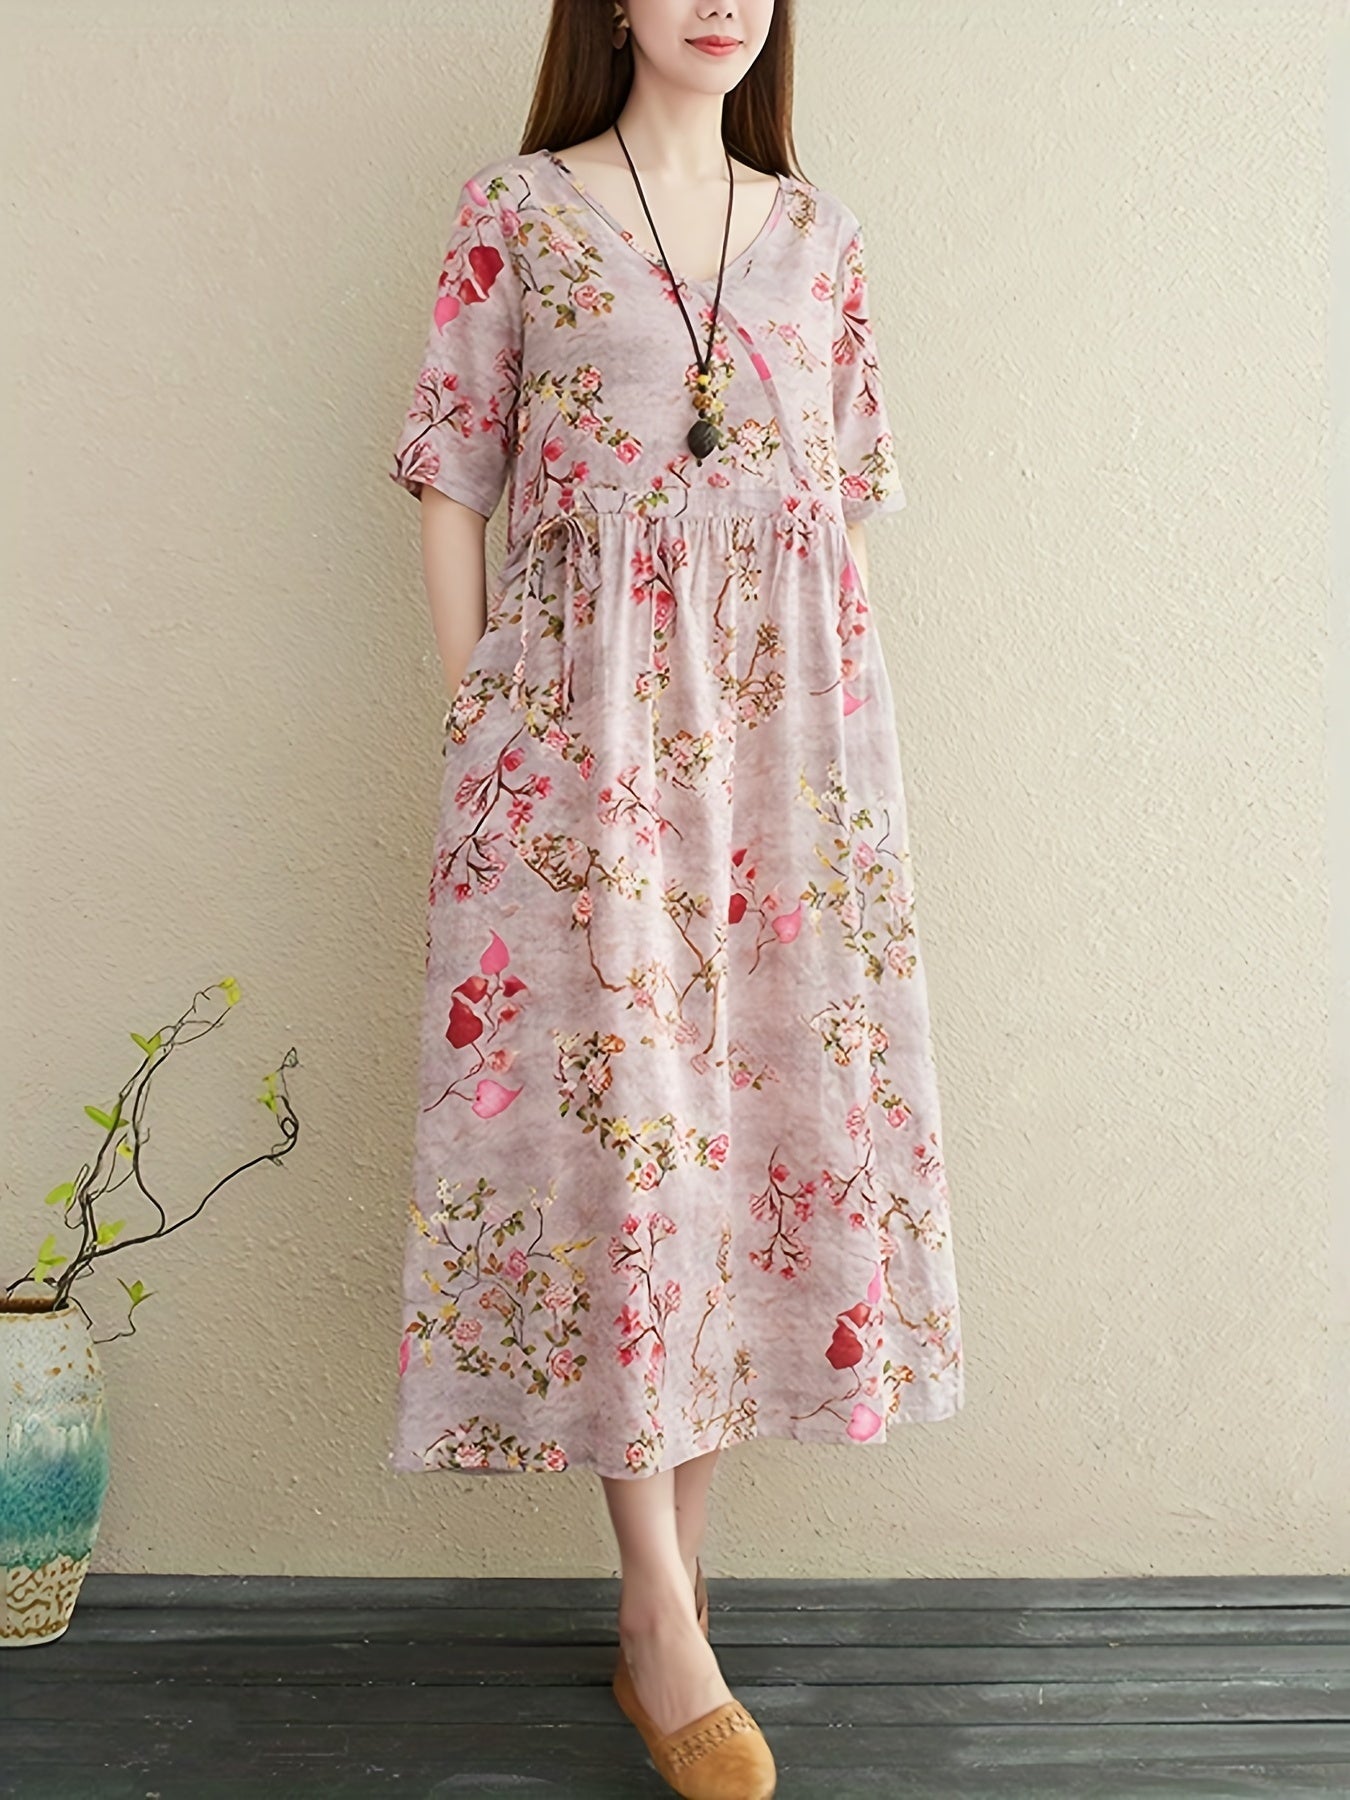 Vintage Midi Floral Print Tie Front Short Sleeve Dressfor Spring and Summer, Women's Clothing